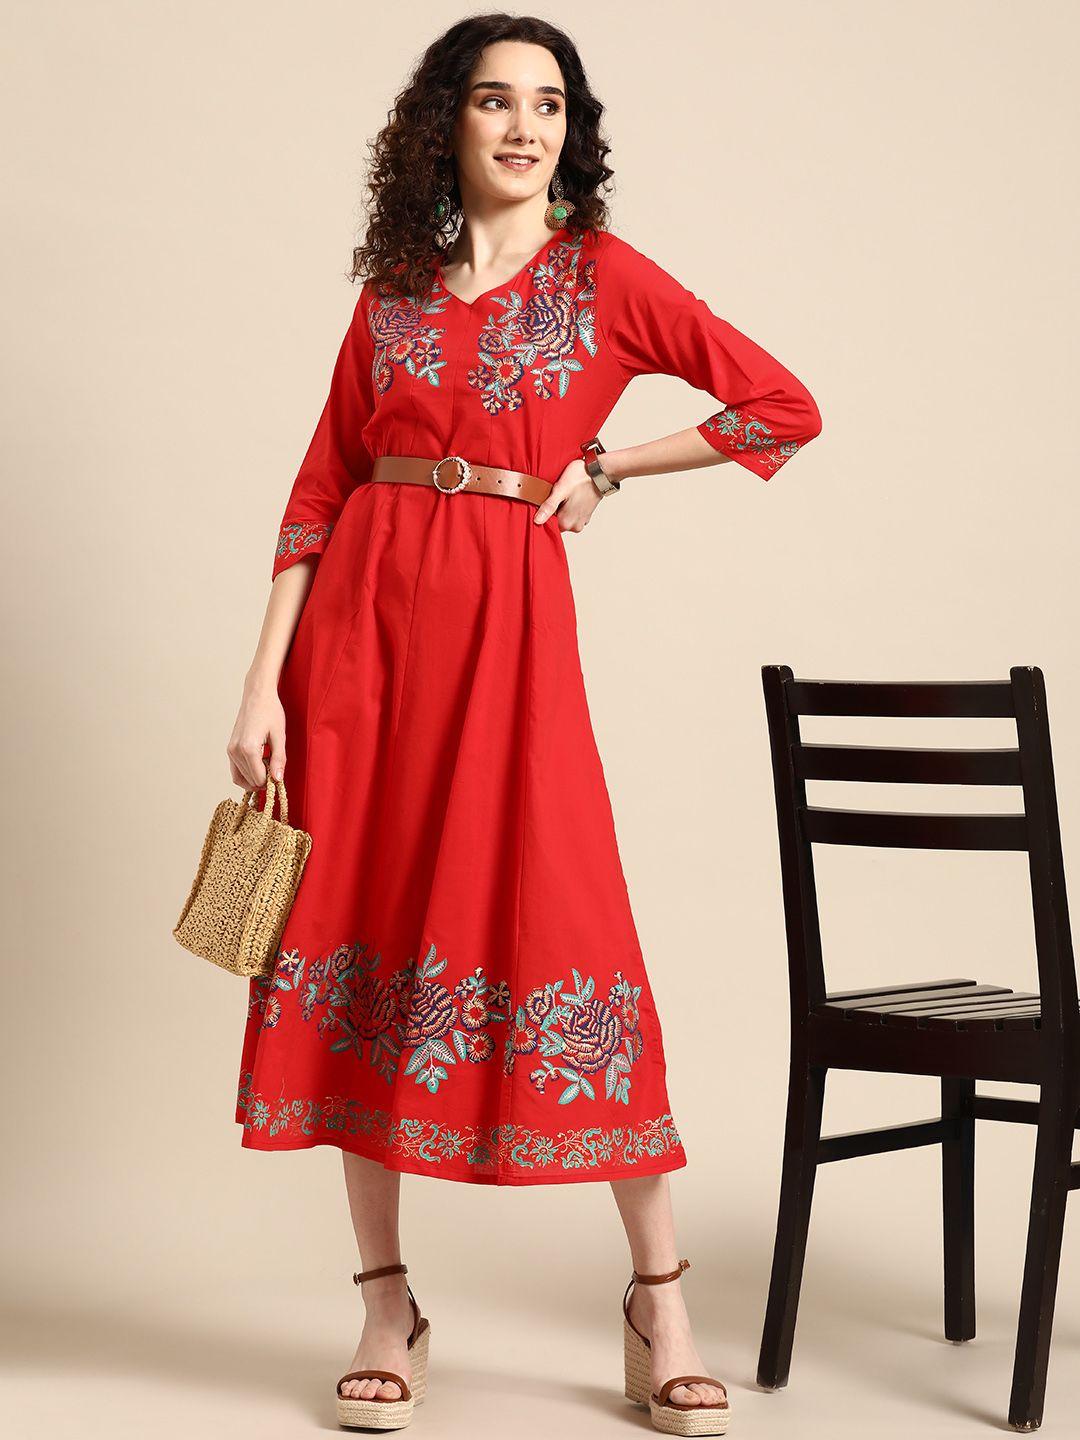 sangria red floral embroidered ethnic maxi dress